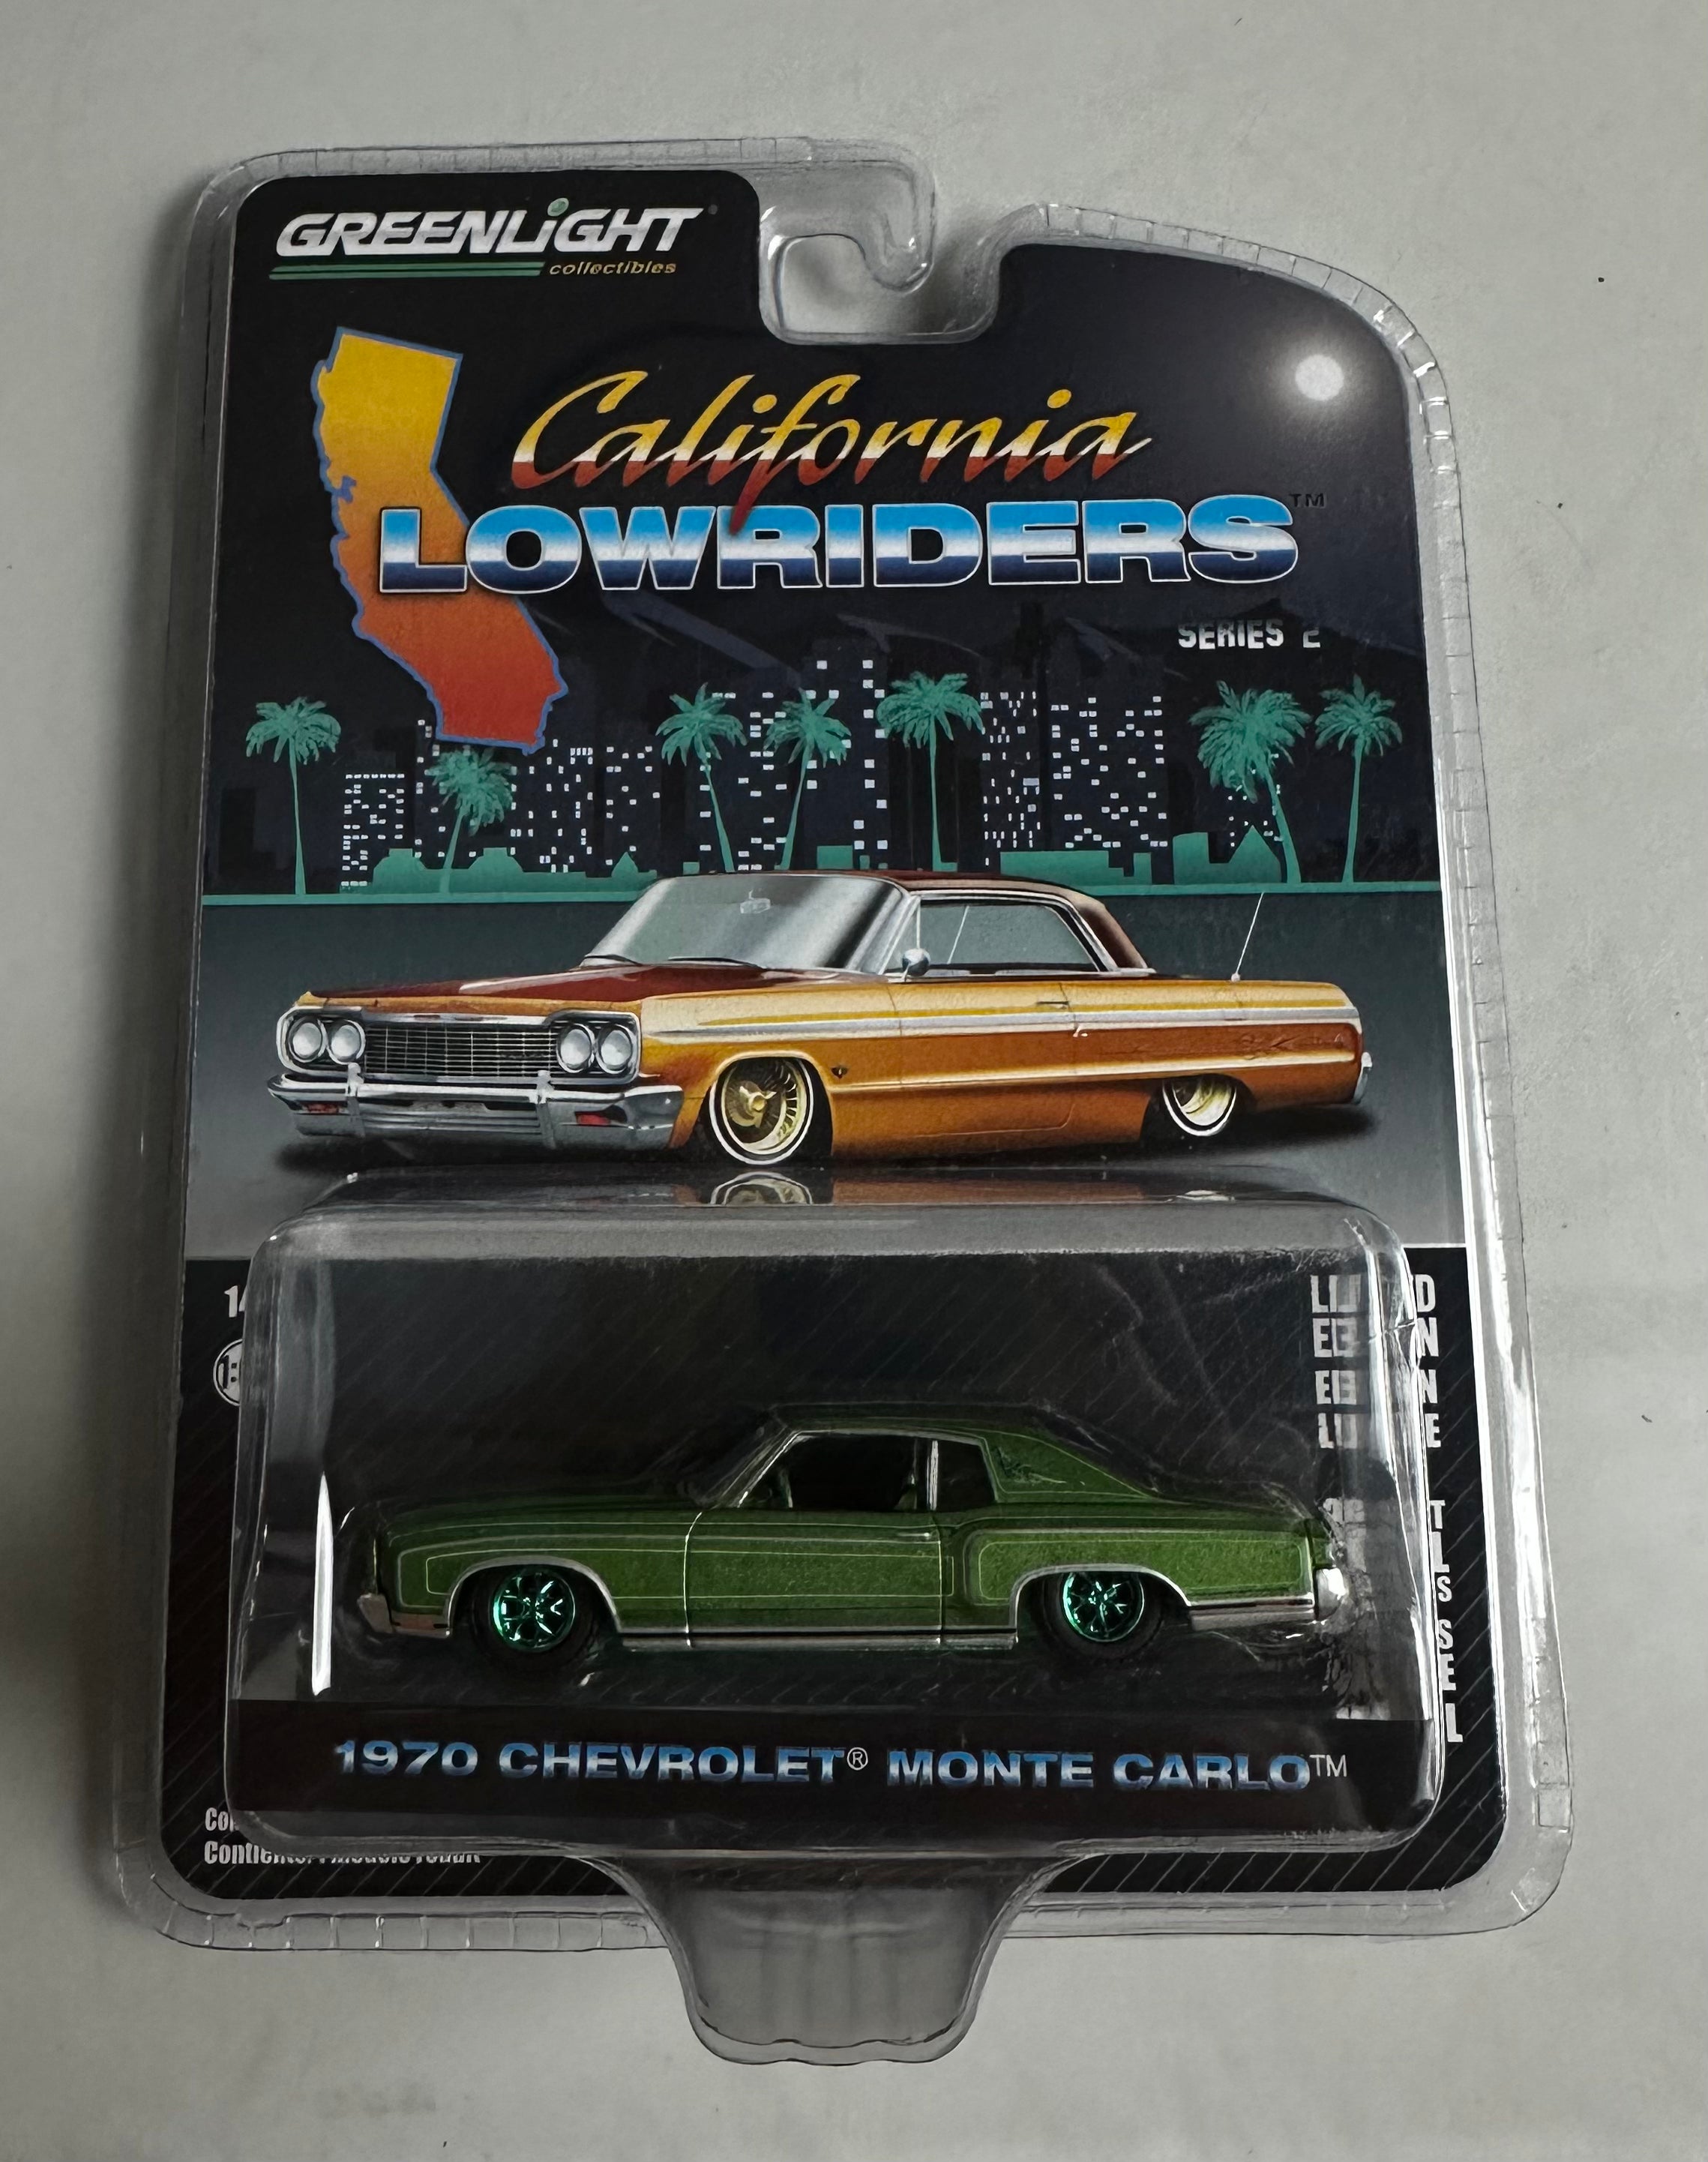 1/64 1970 CHEVROLET MONTE CARLO - CALIFORNIA LOWRIDERS “CHASE” (GREEN RIMS VARIATION)